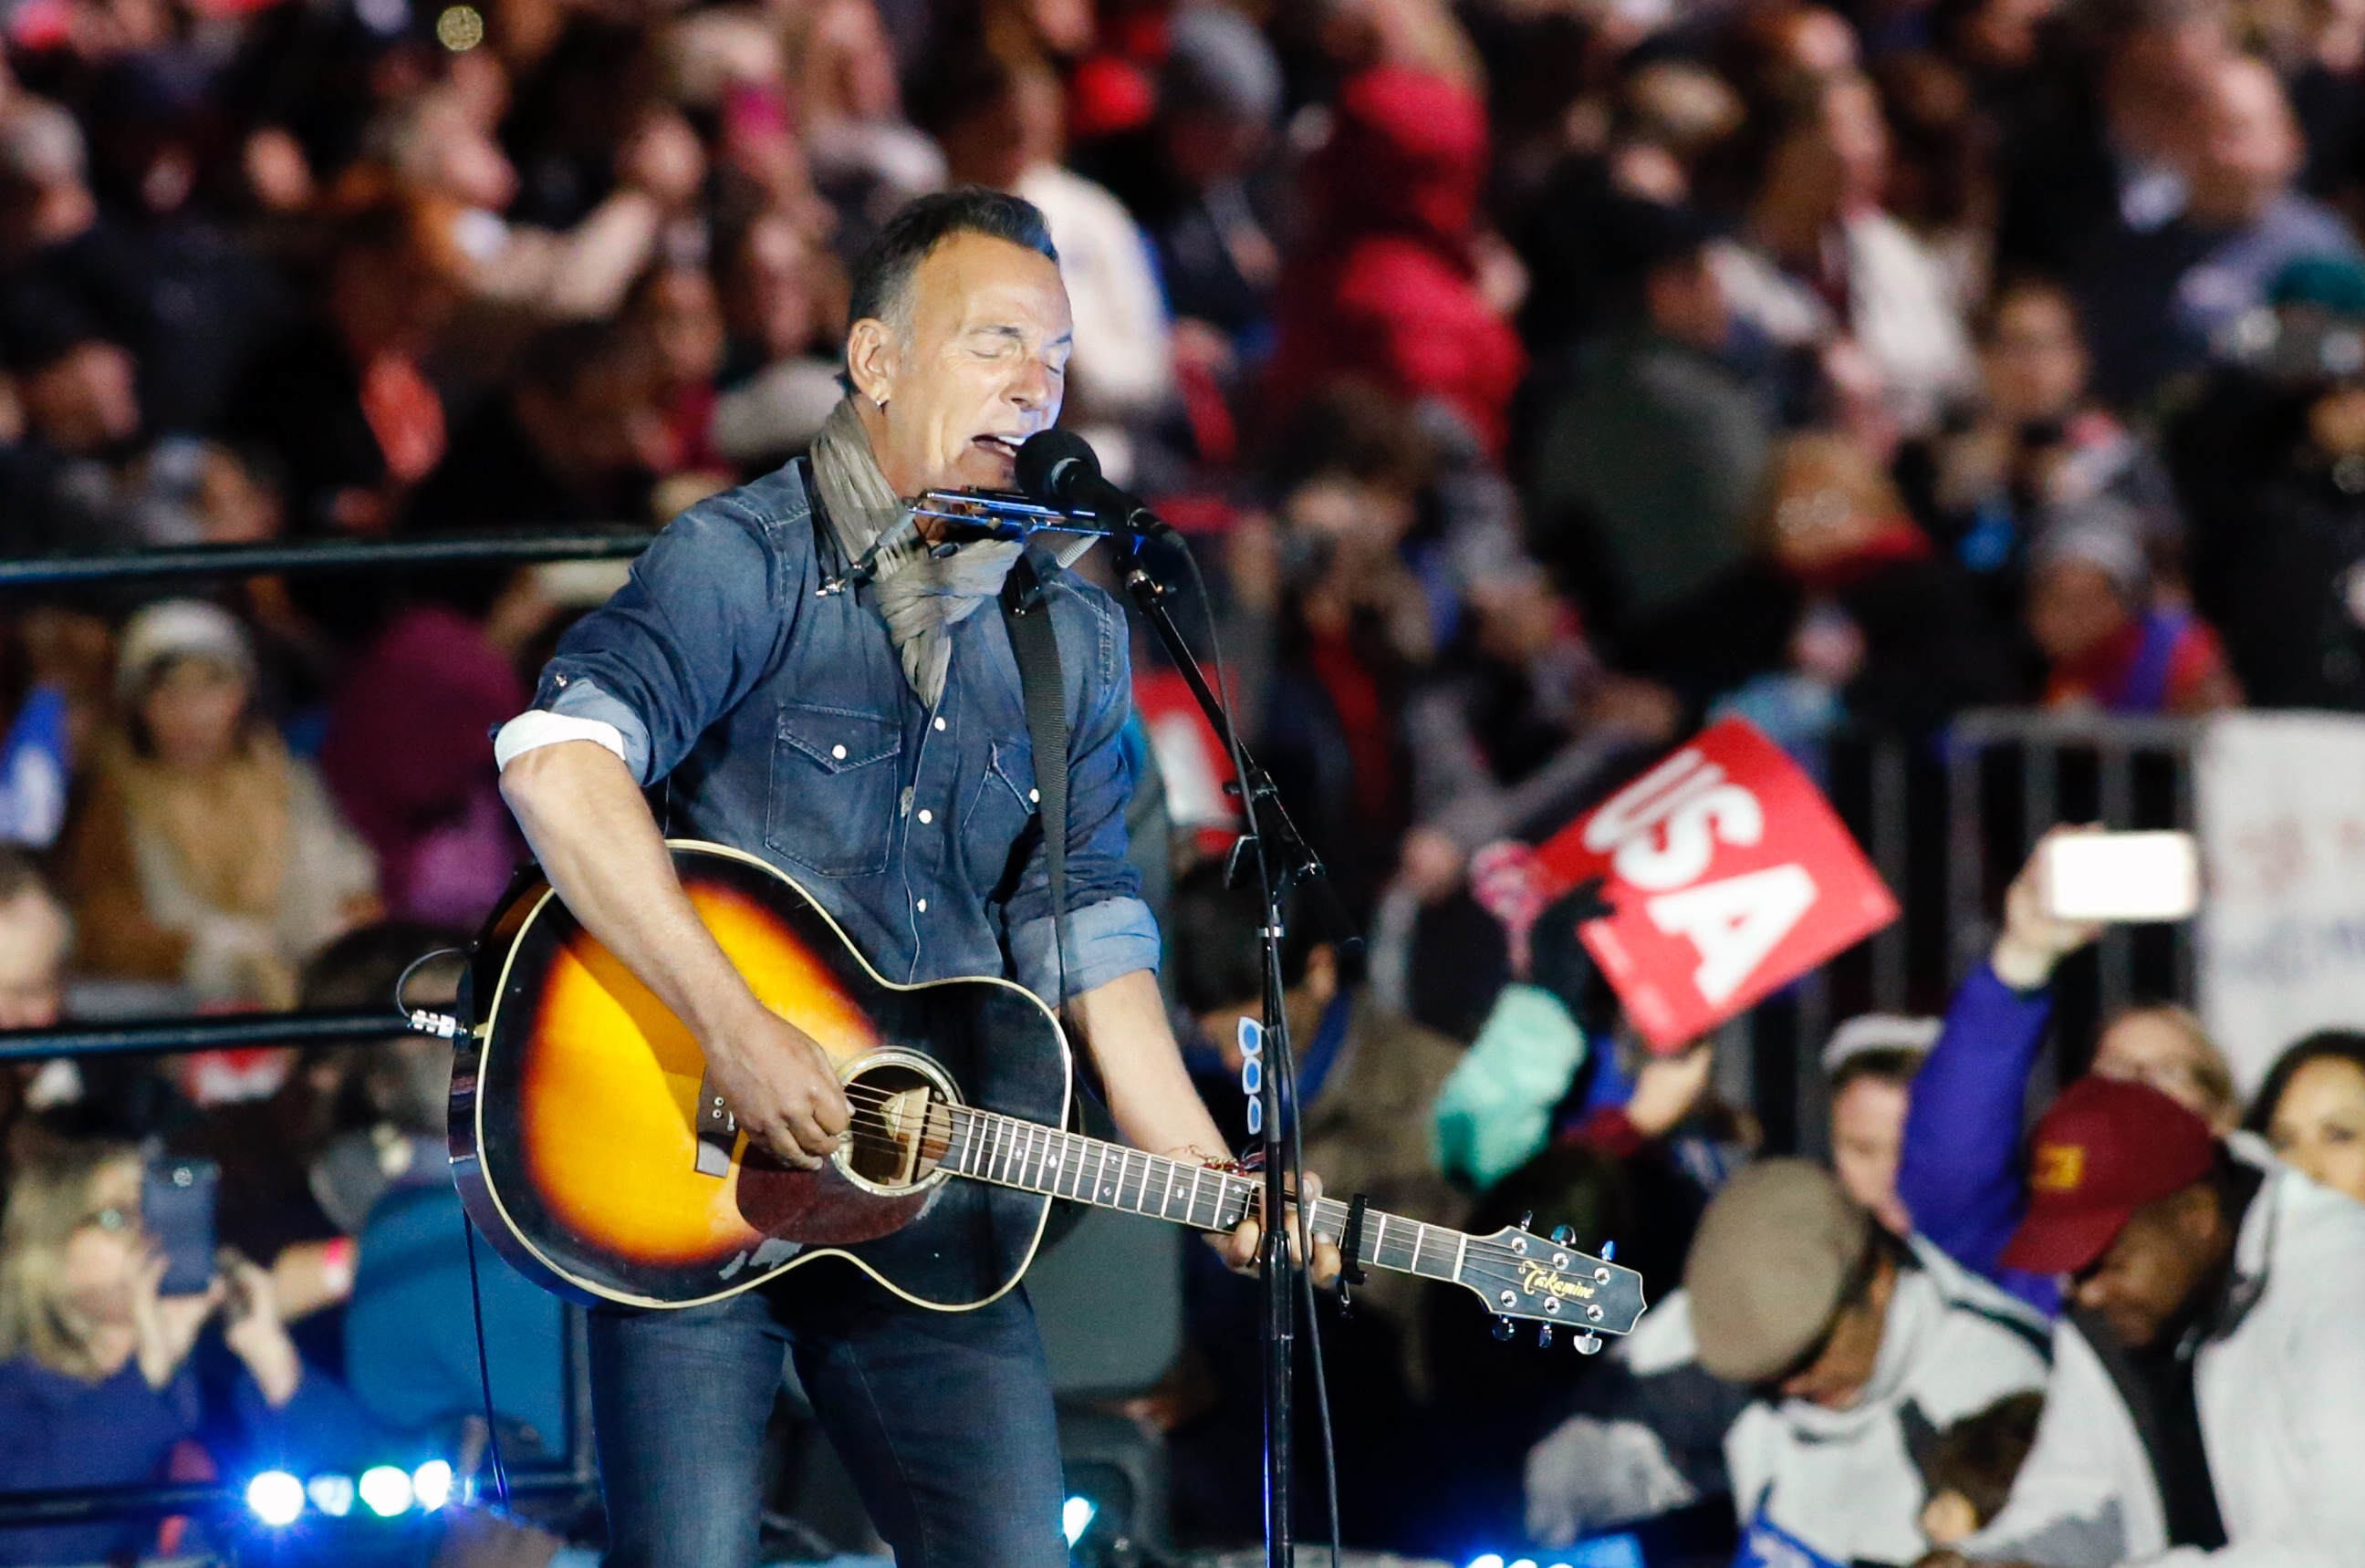 Bruce Springsteen performs during a rally in suport of Hillary Clinton, 2016 Democratic presidential nominee on the Independence Mall in Philadelphia, Pennsylvania,on November 07, 2016